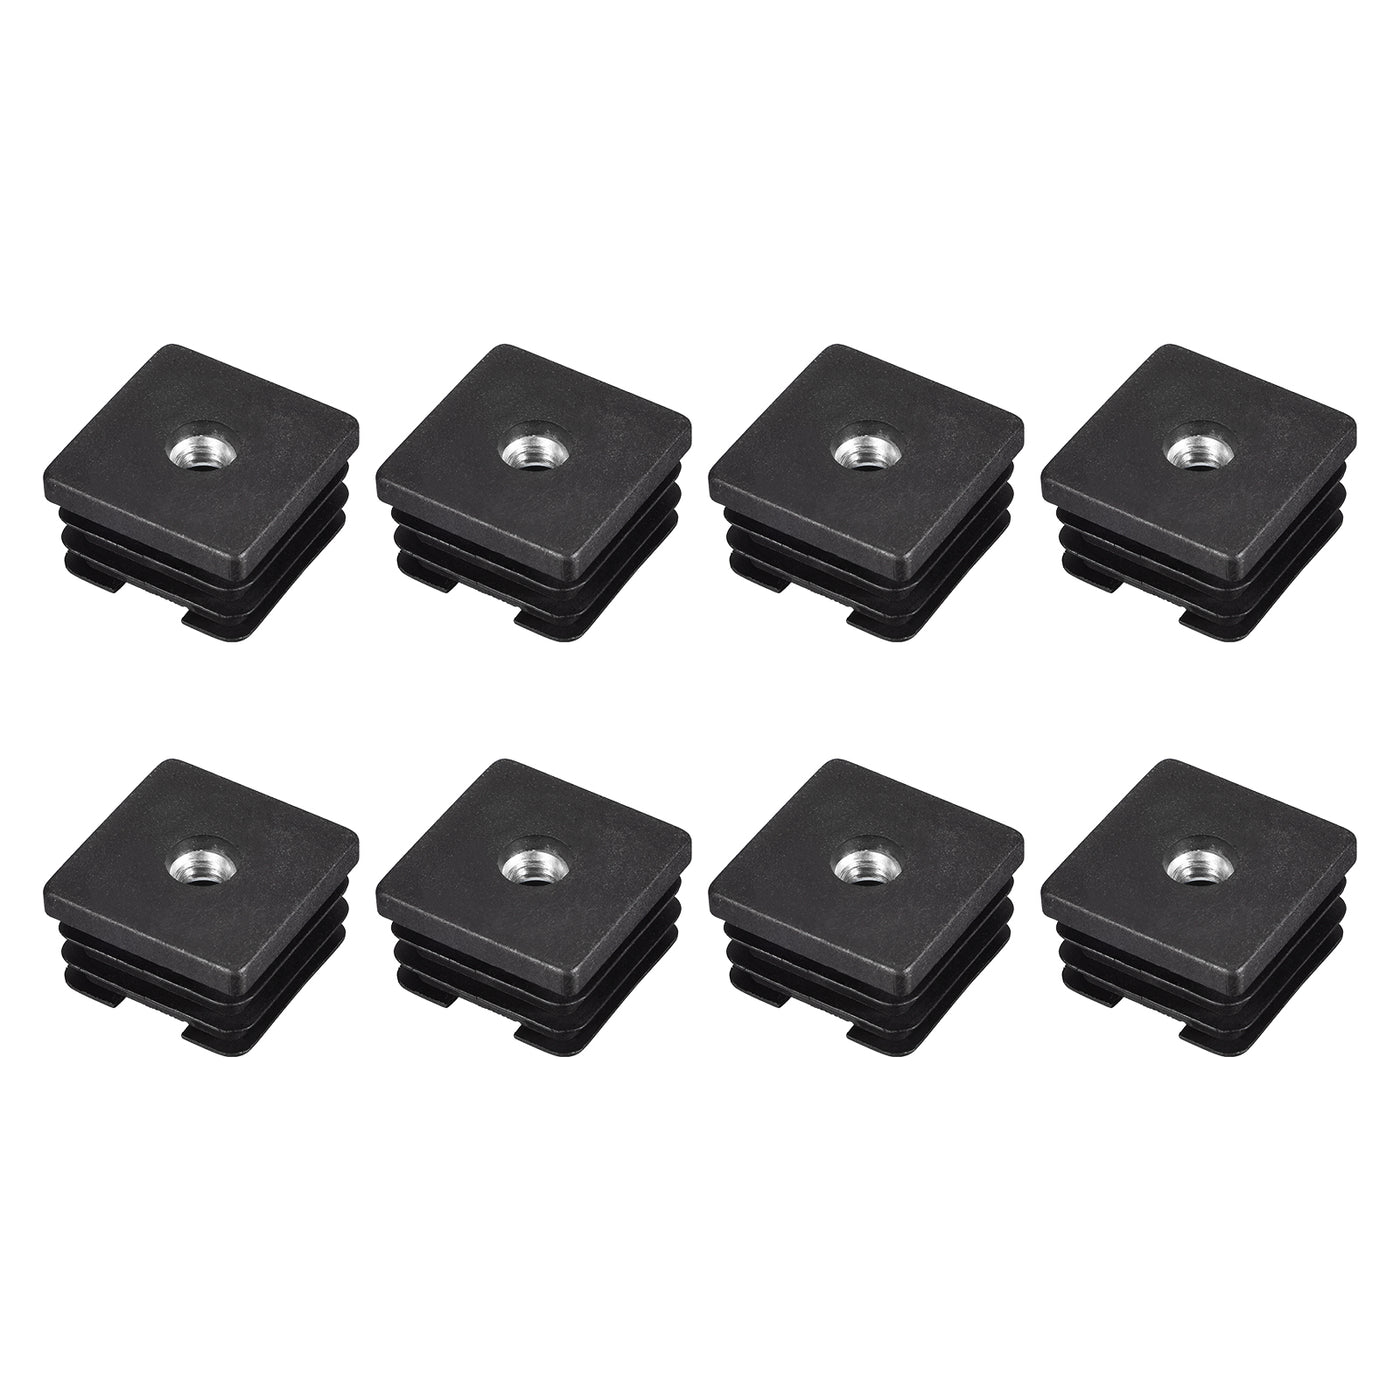 uxcell Uxcell 8Pcs 1.38"x1.38" Caster Insert with Thread, Square M8 Thread for Furniture